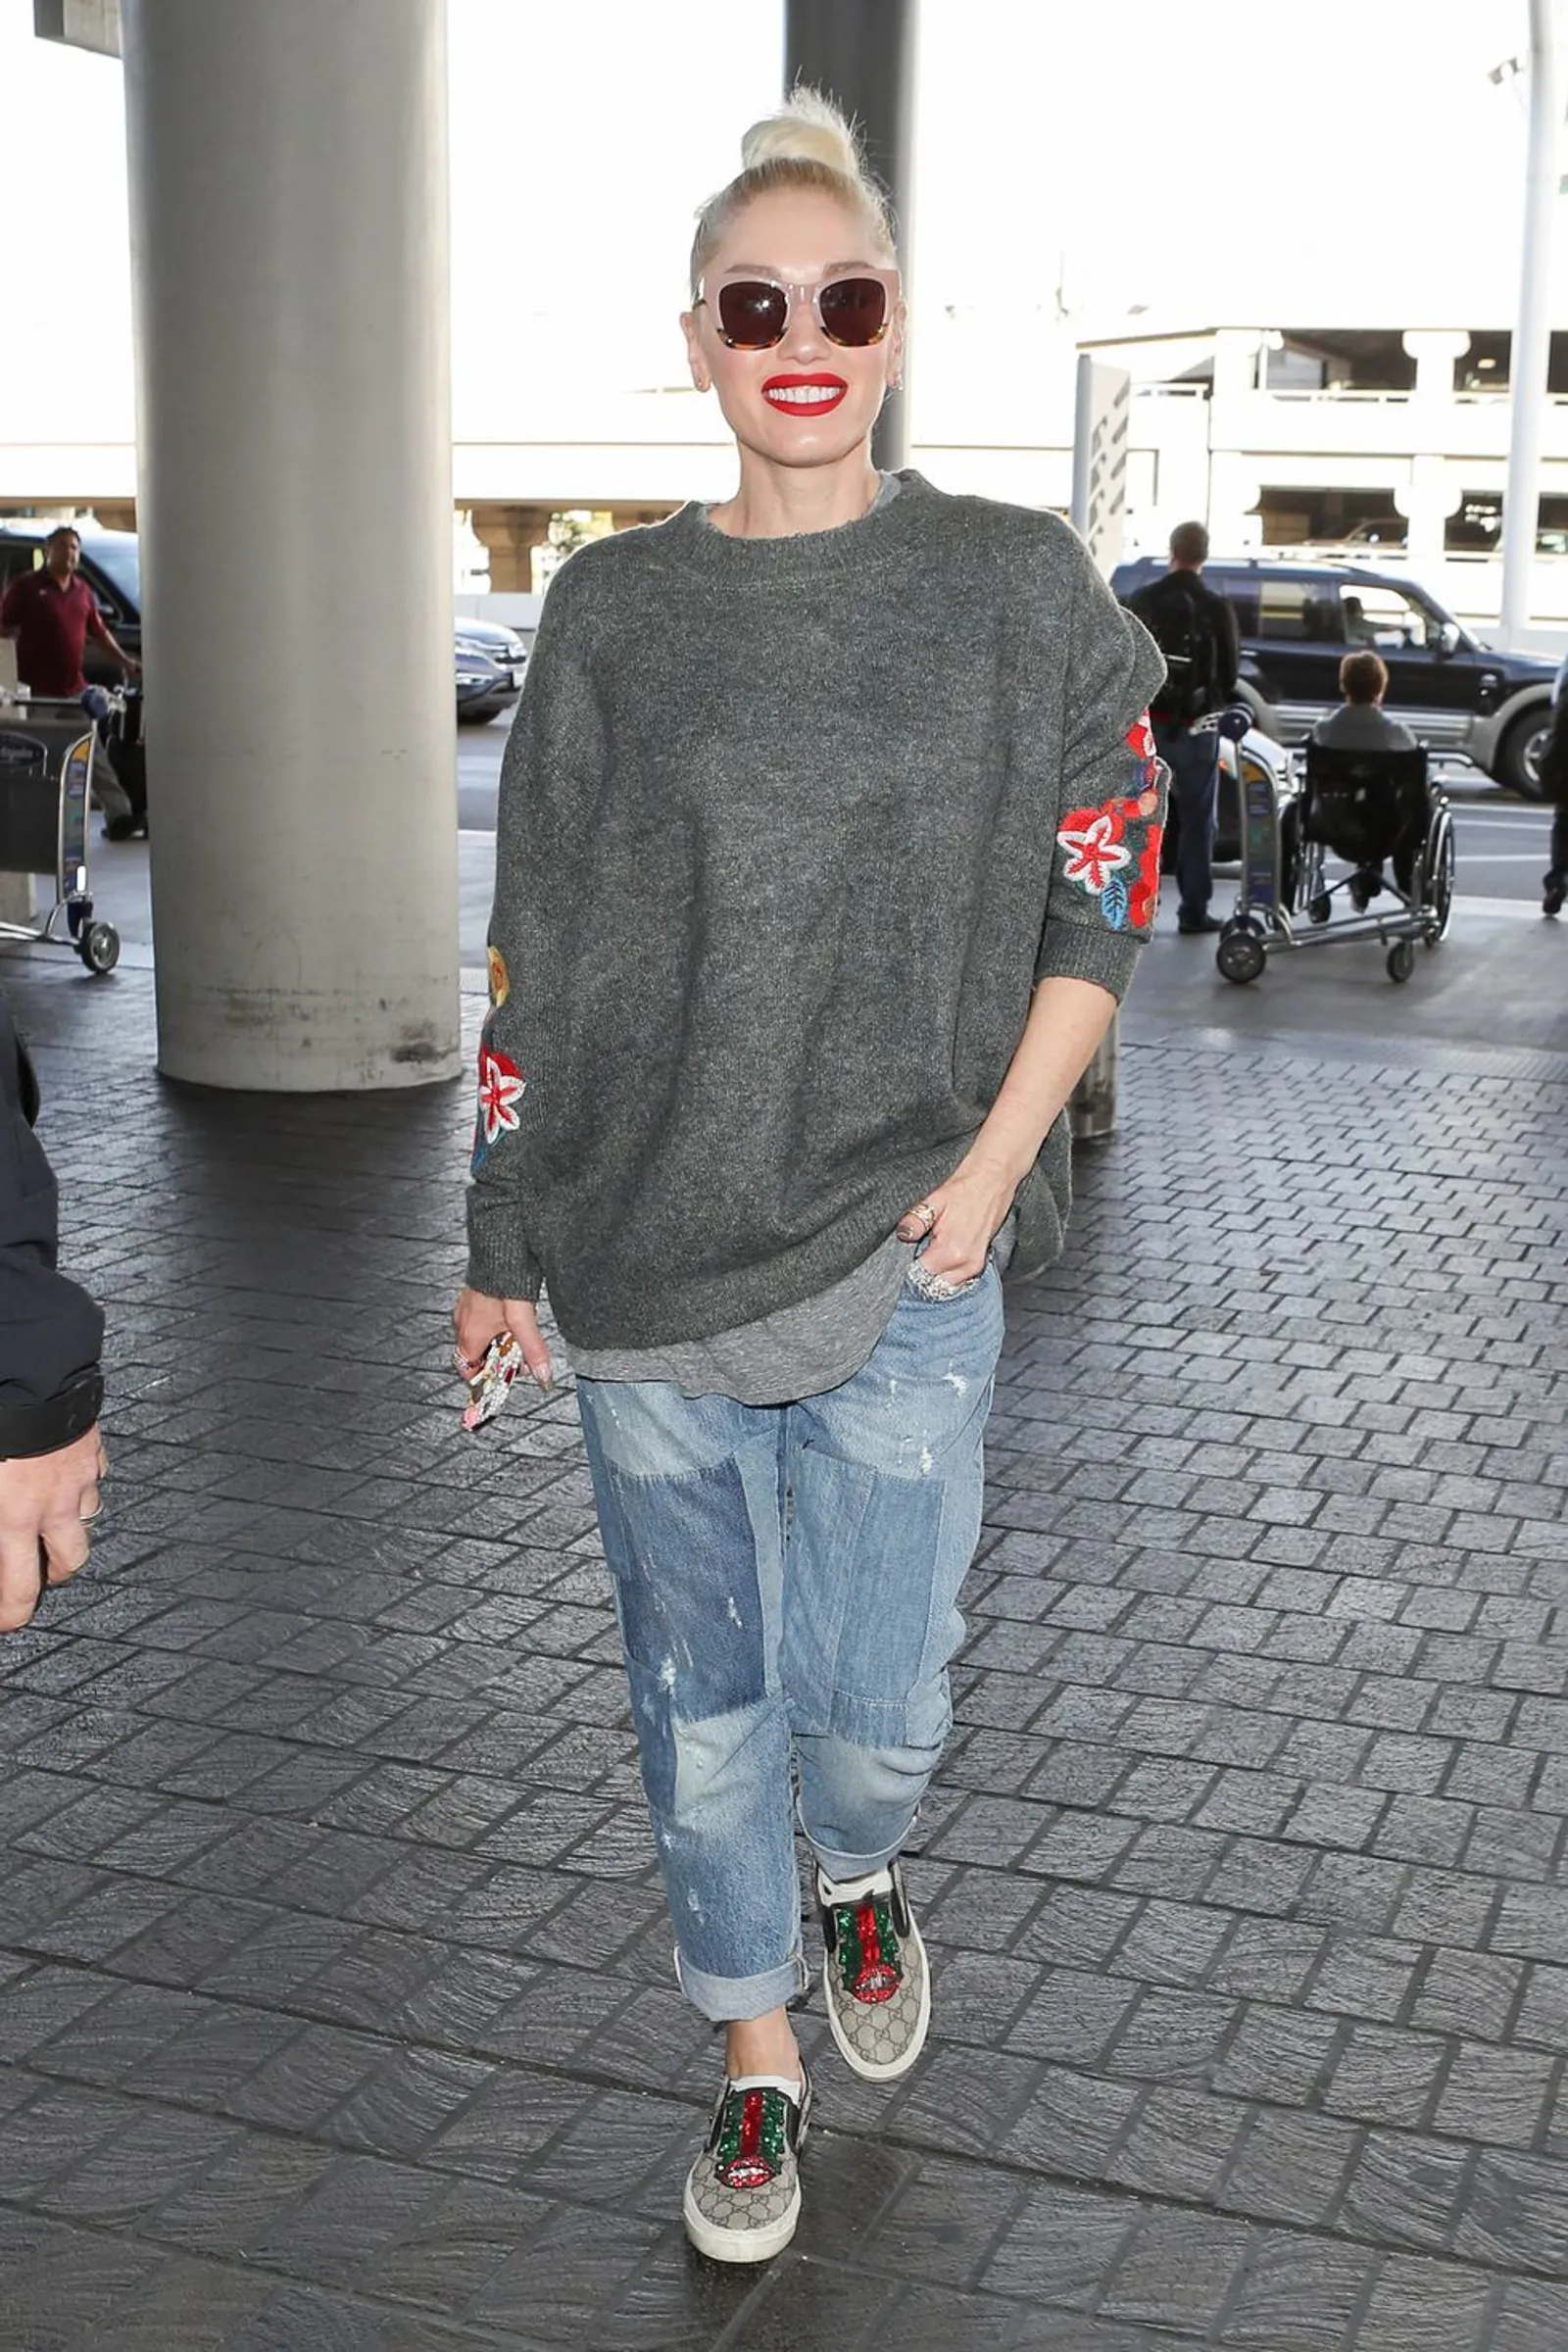 On Point! Intip 5 Airport Style Kece A la Seleb Hollywood